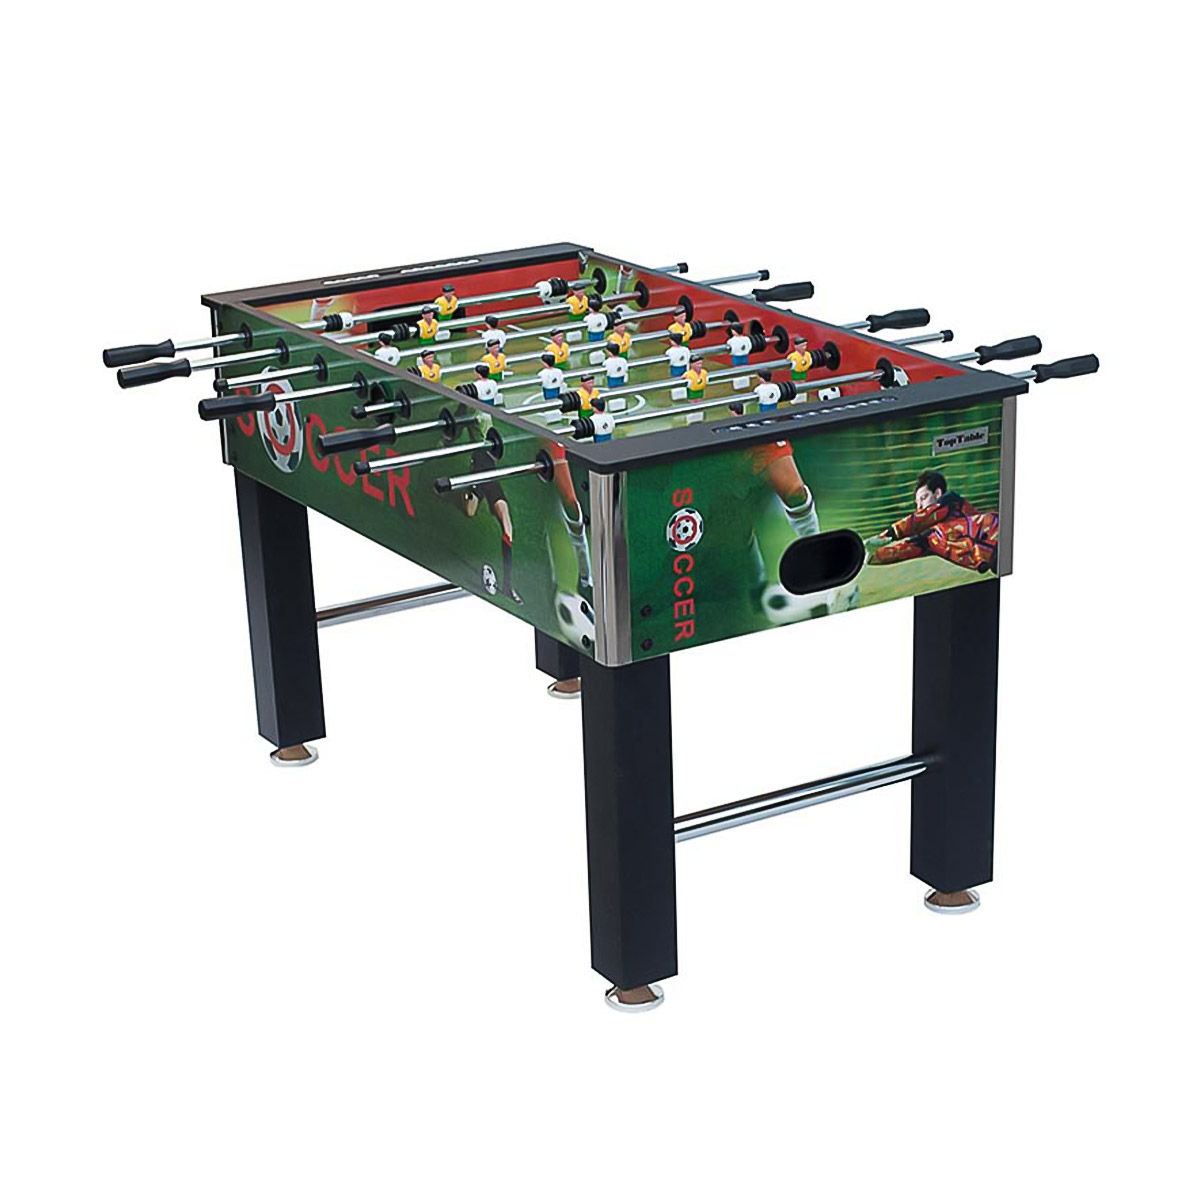 Professional Foosball Table At Factory Price-China Wholesaler | WIN.MAX Featured Image